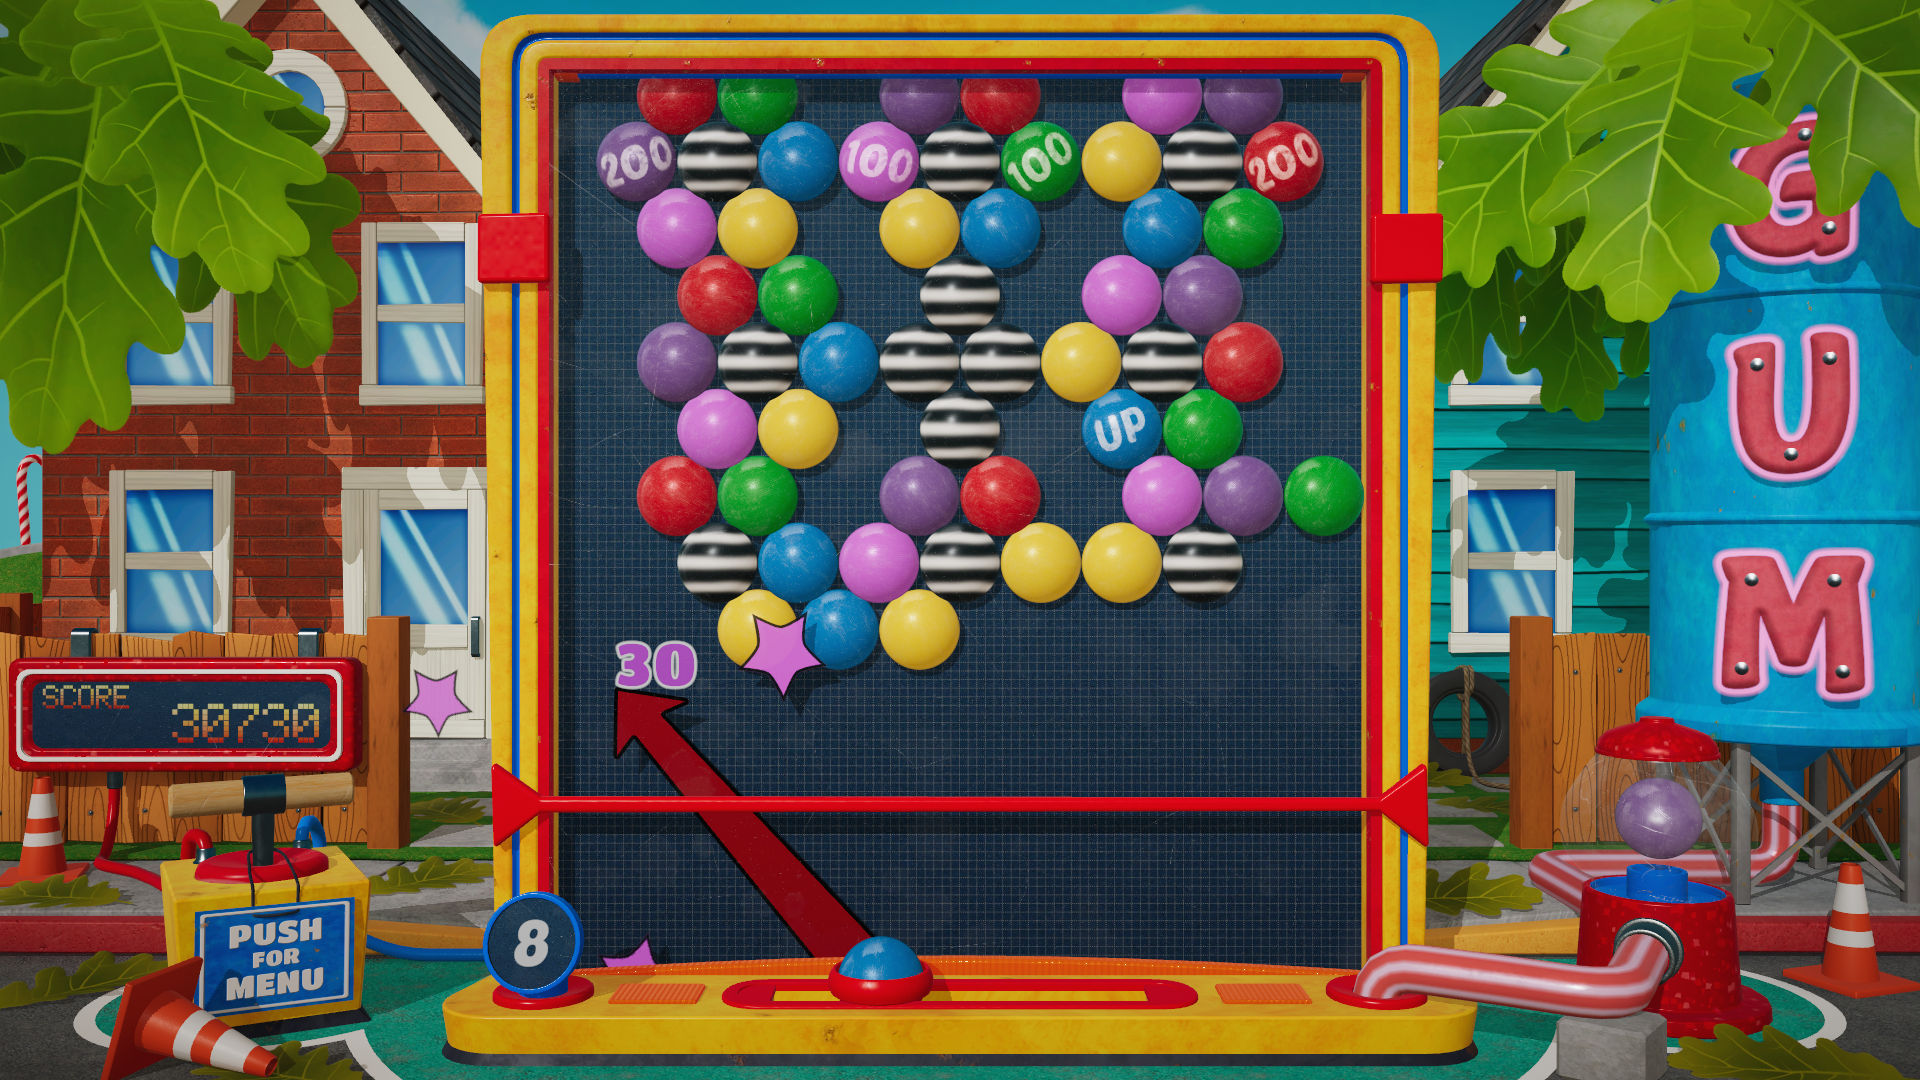 Puzzle By Puzzle Screenshot 3